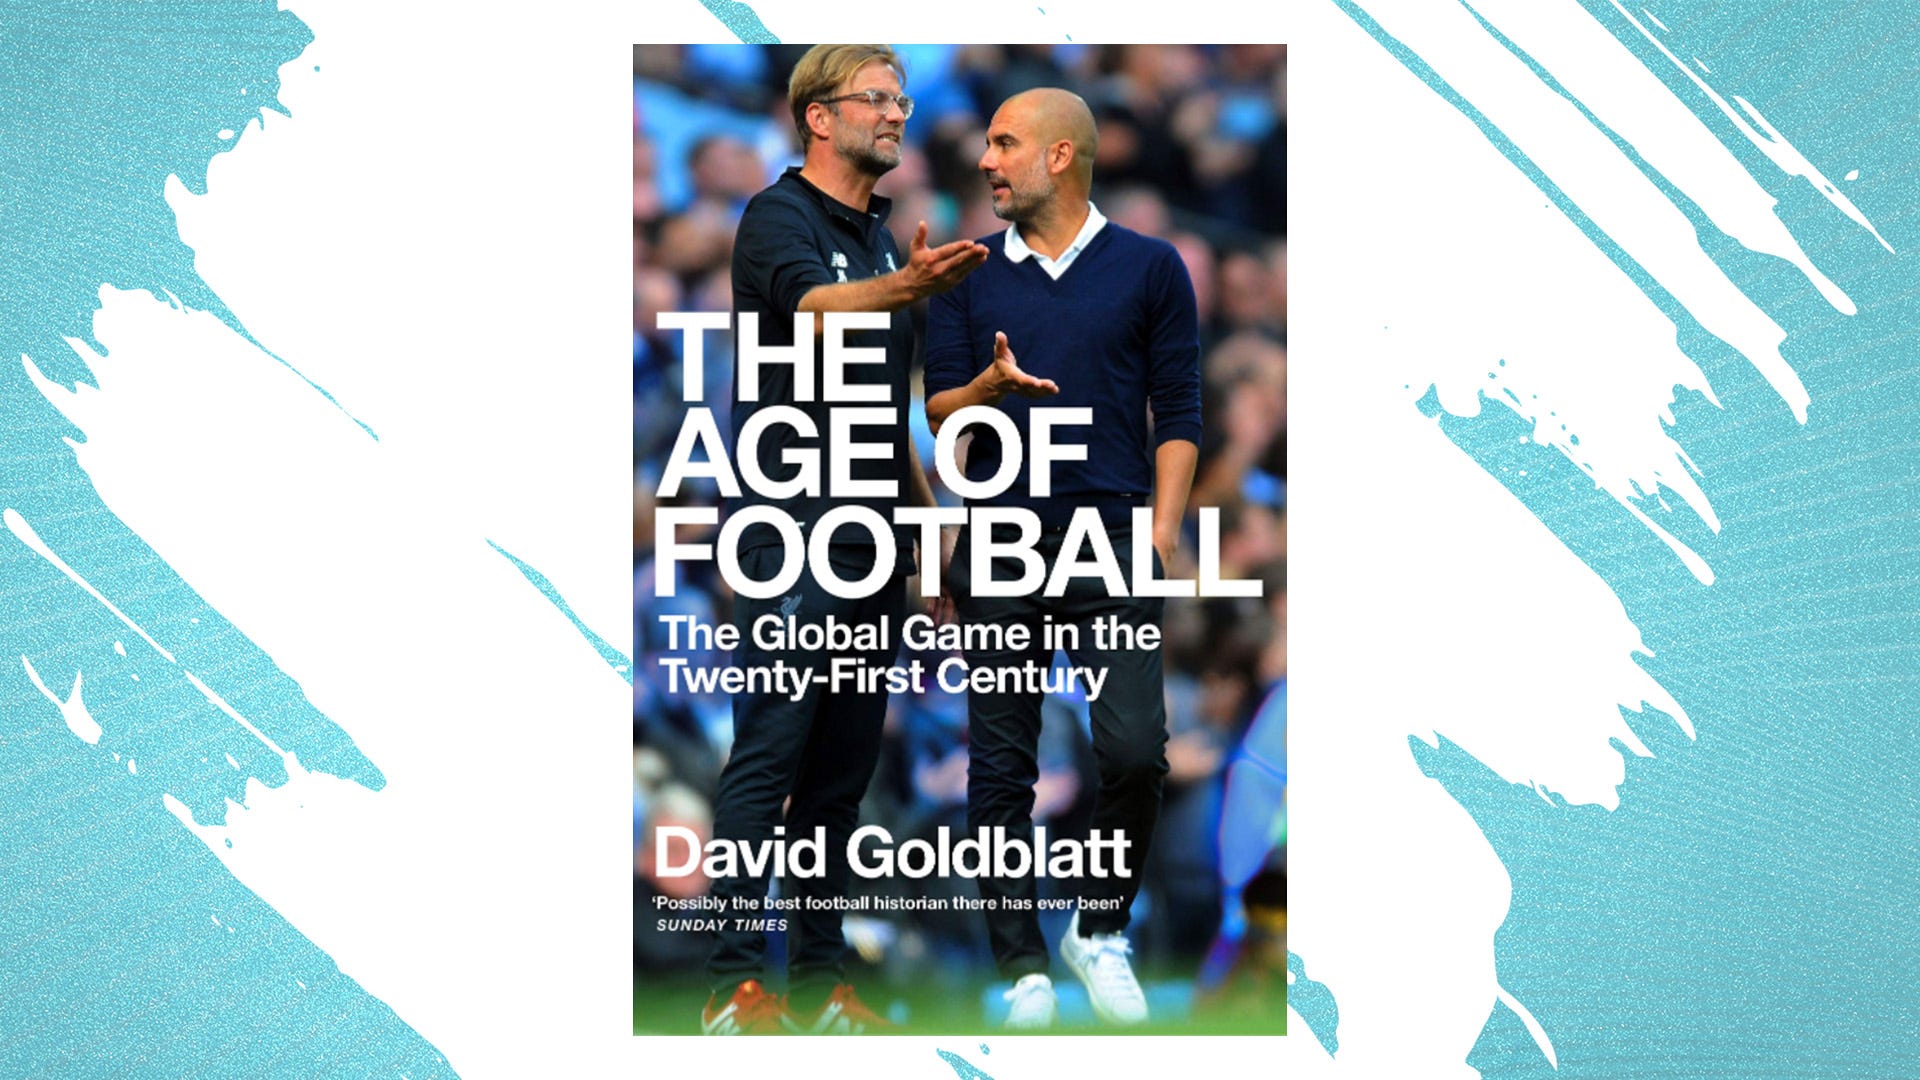 The Age Of Football book